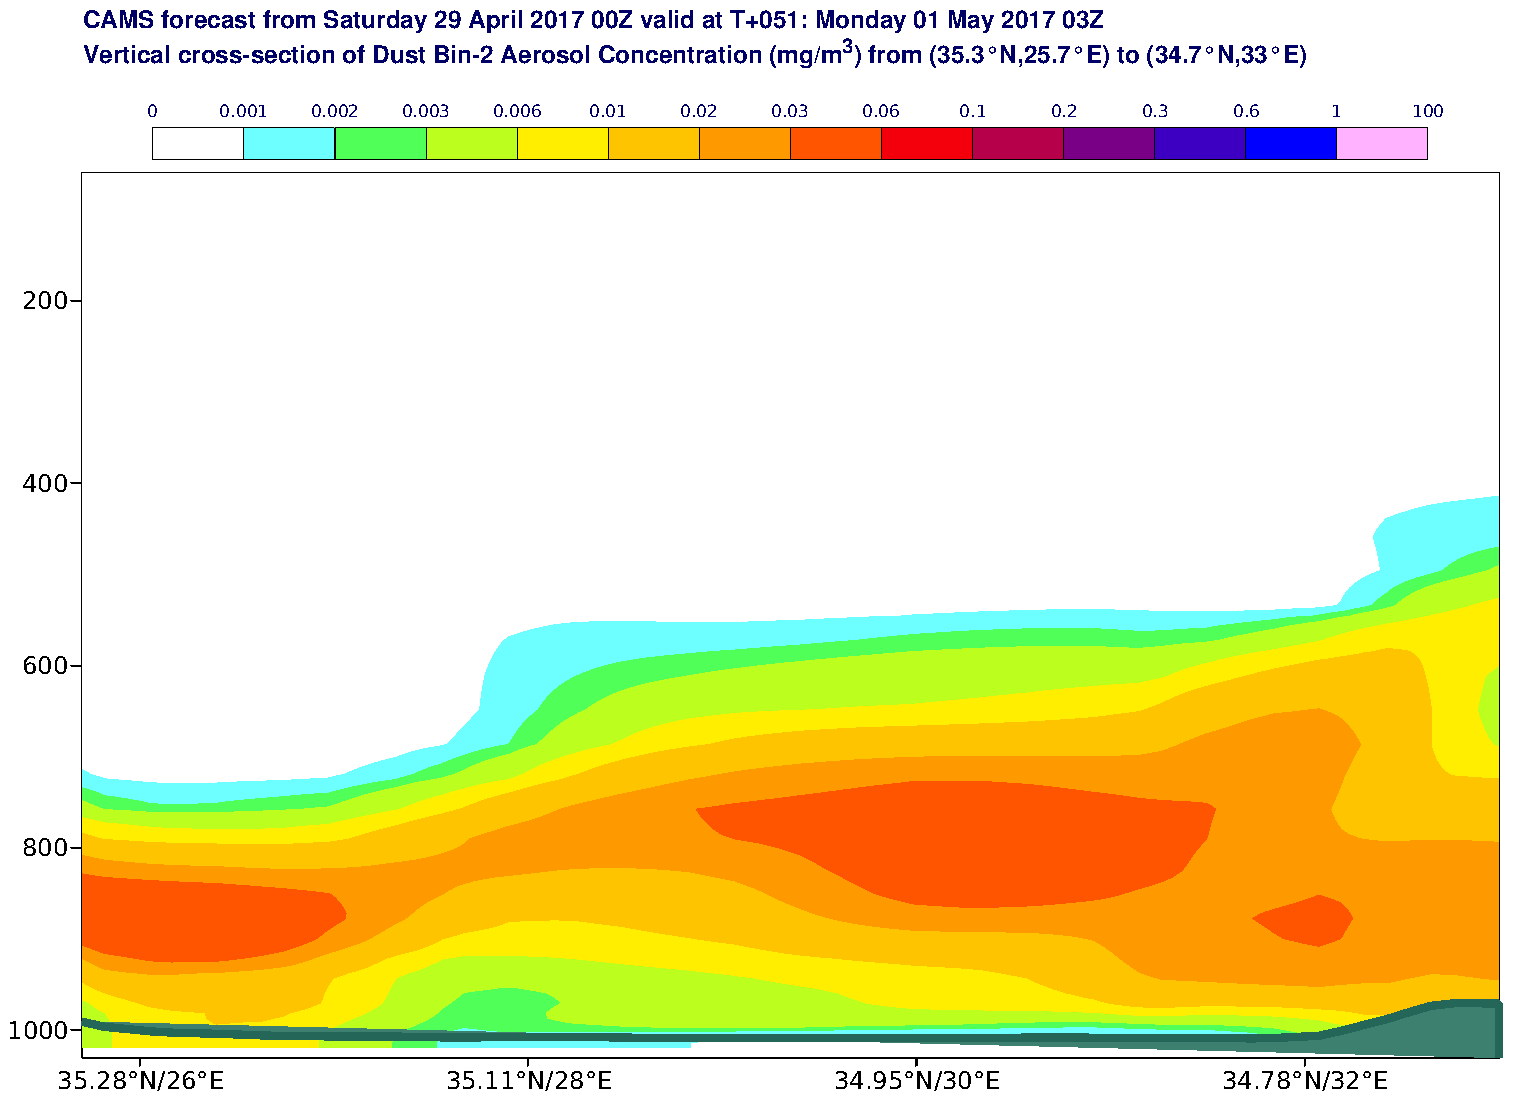 Vertical cross-section of Dust Bin-2 Aerosol Concentration (mg/m3) valid at T51 - 2017-05-01 03:00